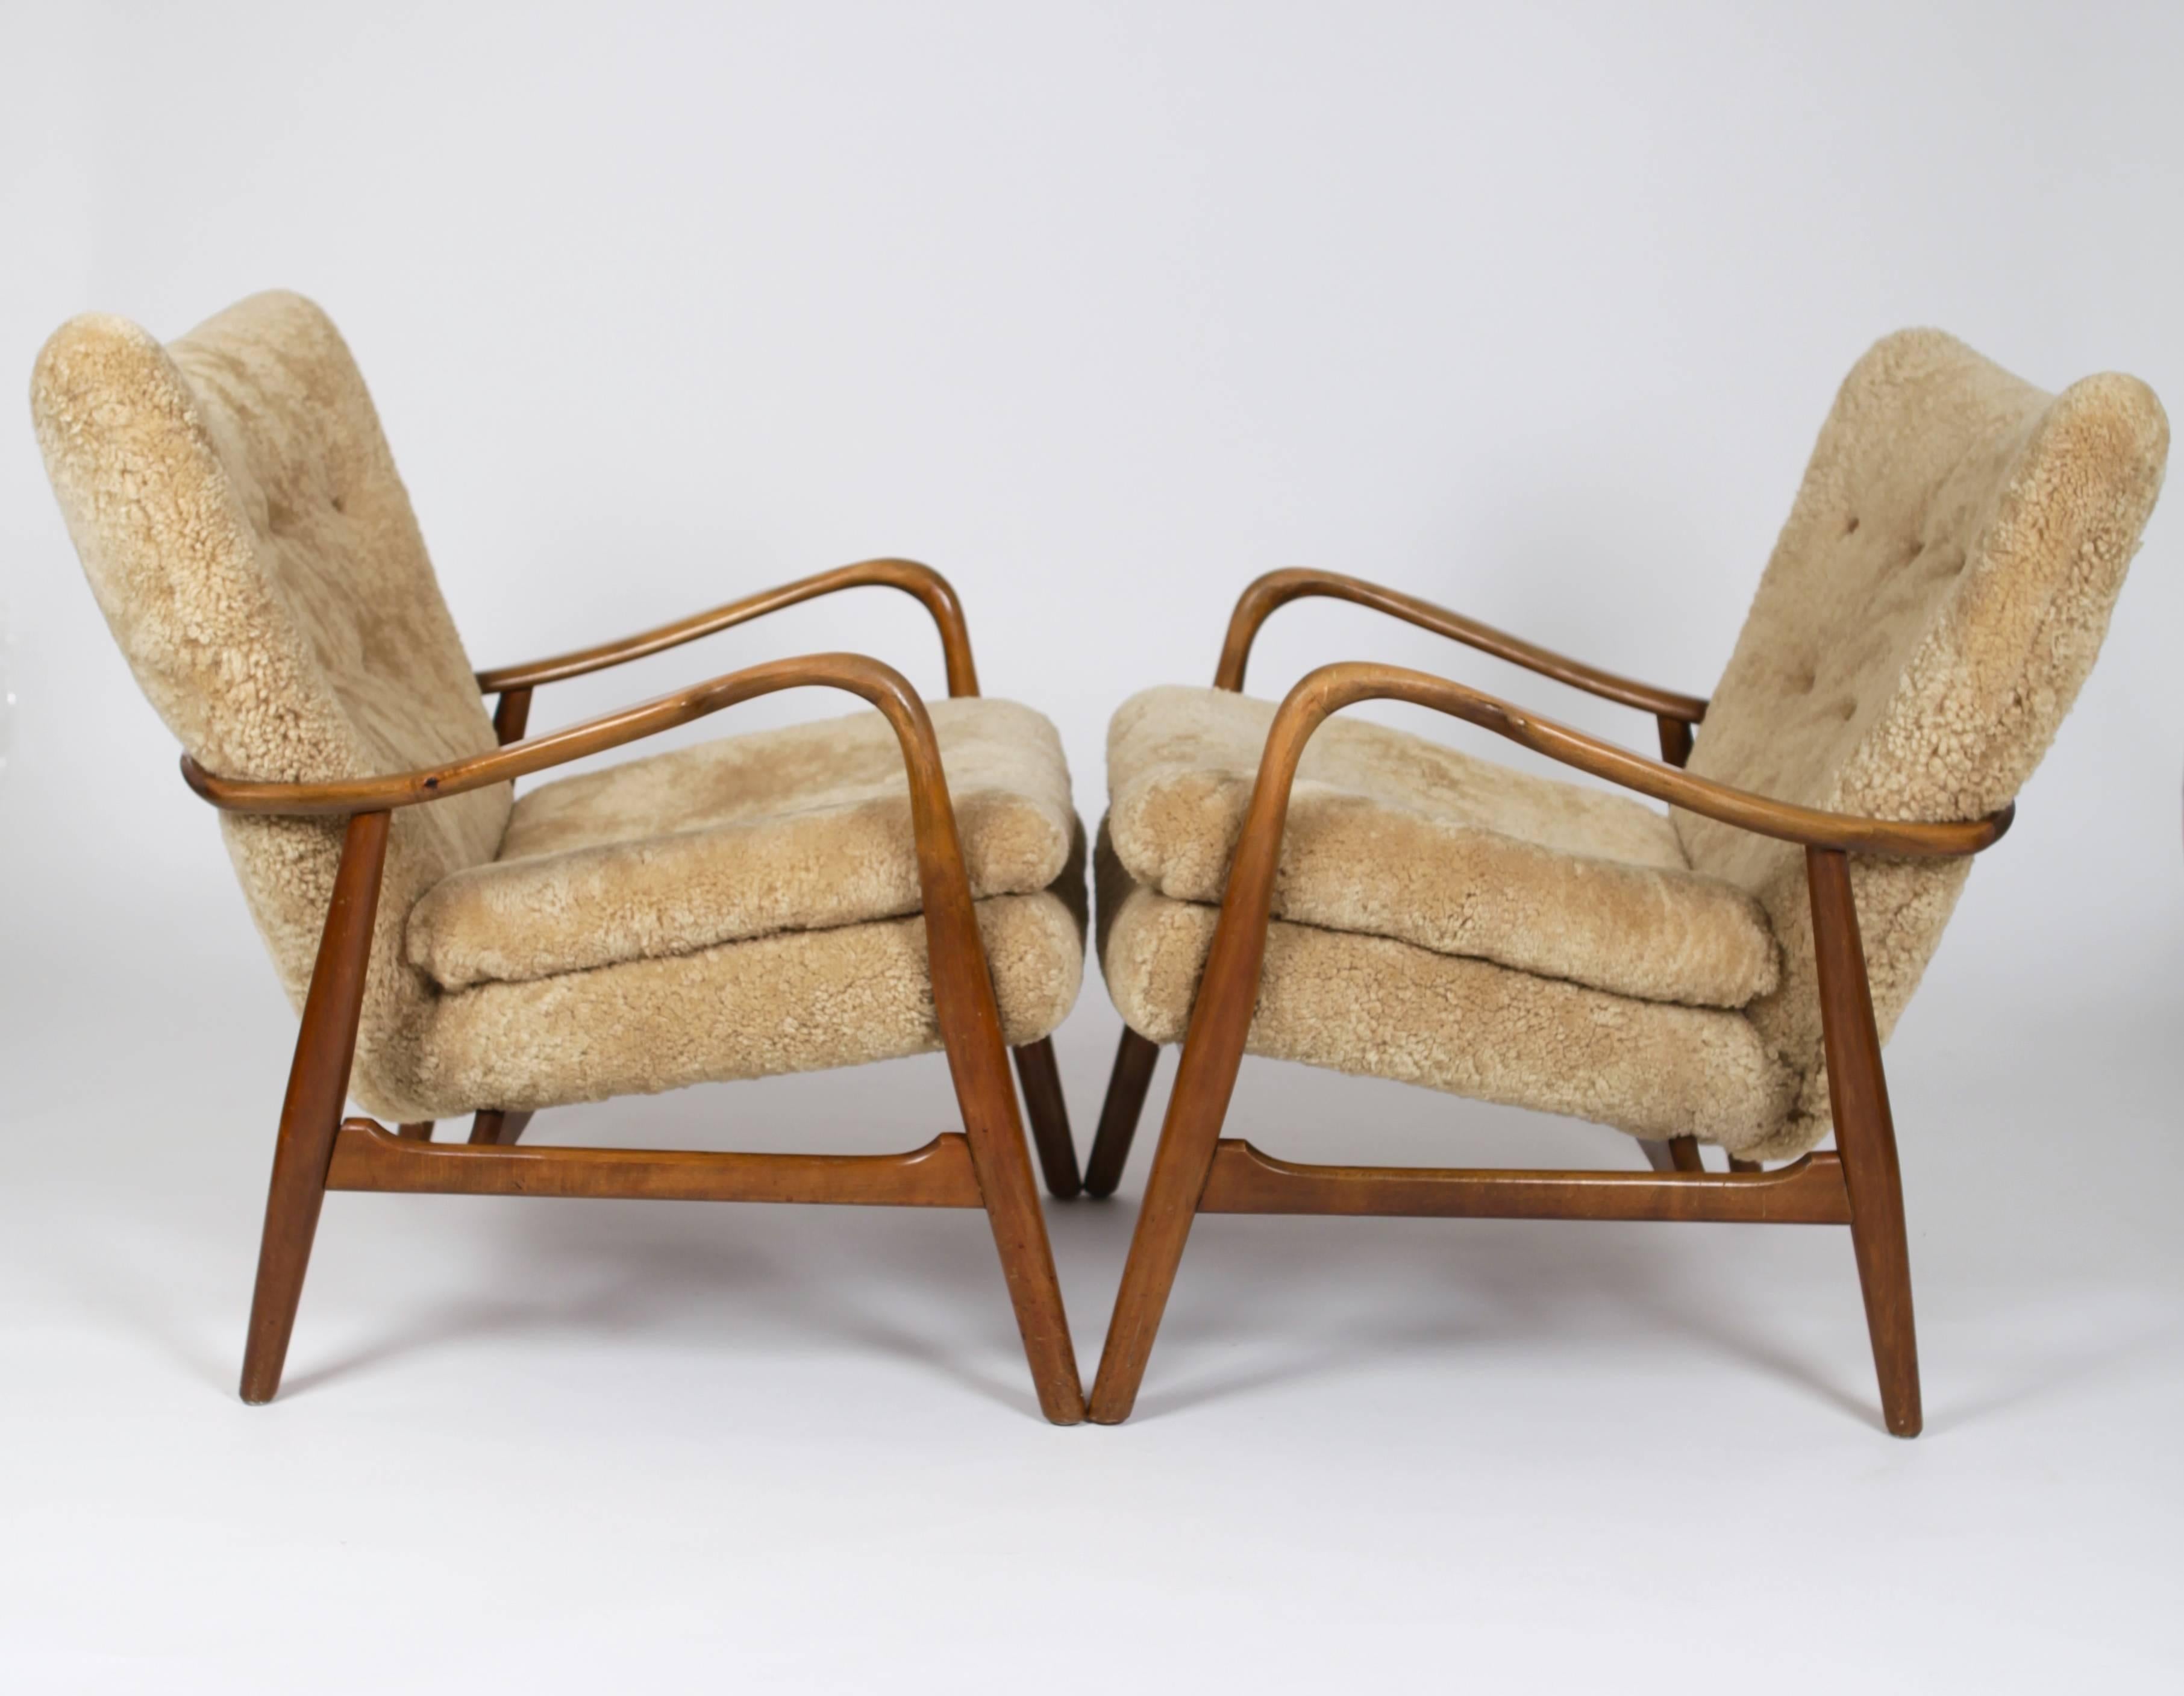 A pair of armchairs with one ottoman in stained beech and lambskin by
Acton Schubell & Ib Madsen, Denmark, 1950s
manufactured by Madsen and Schubell, Rungsted.